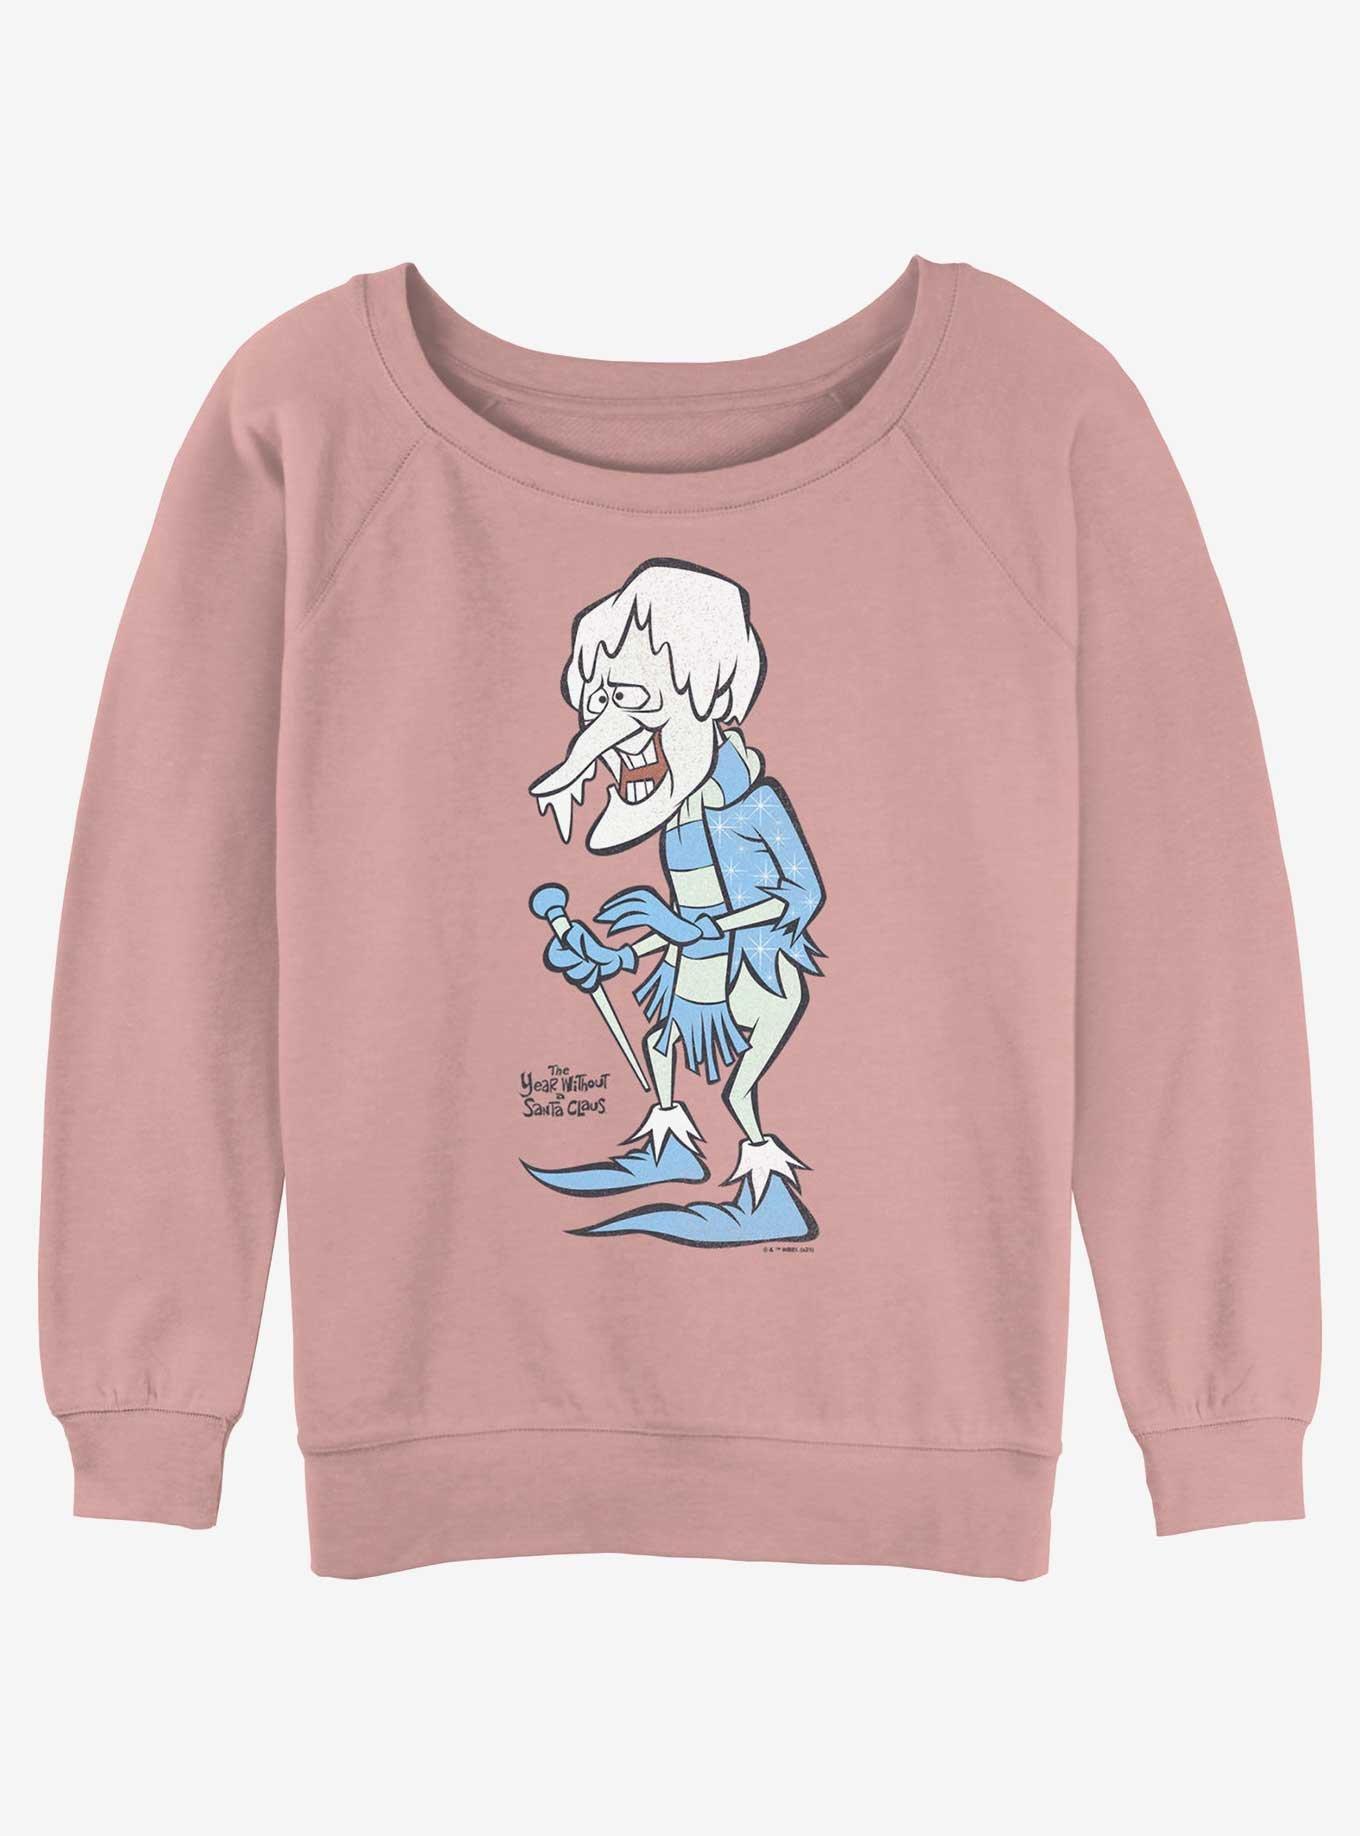 The Year Without a Santa Claus Snow Miser Girls Slouchy Sweatshirt, DESERTPNK, hi-res